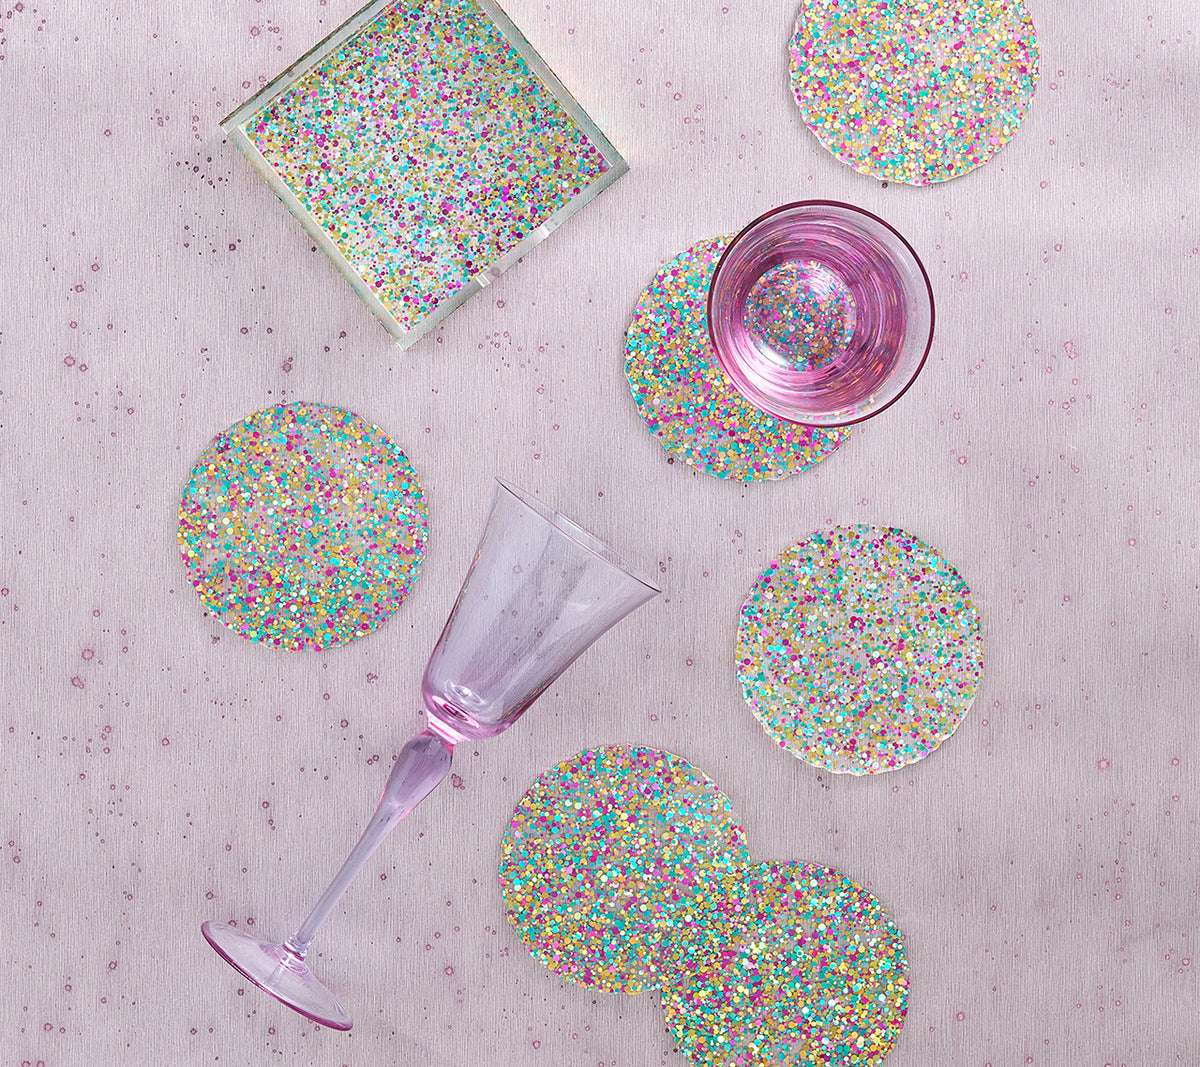 Prism Coasters in Multi, Set of 4 in a Caddy